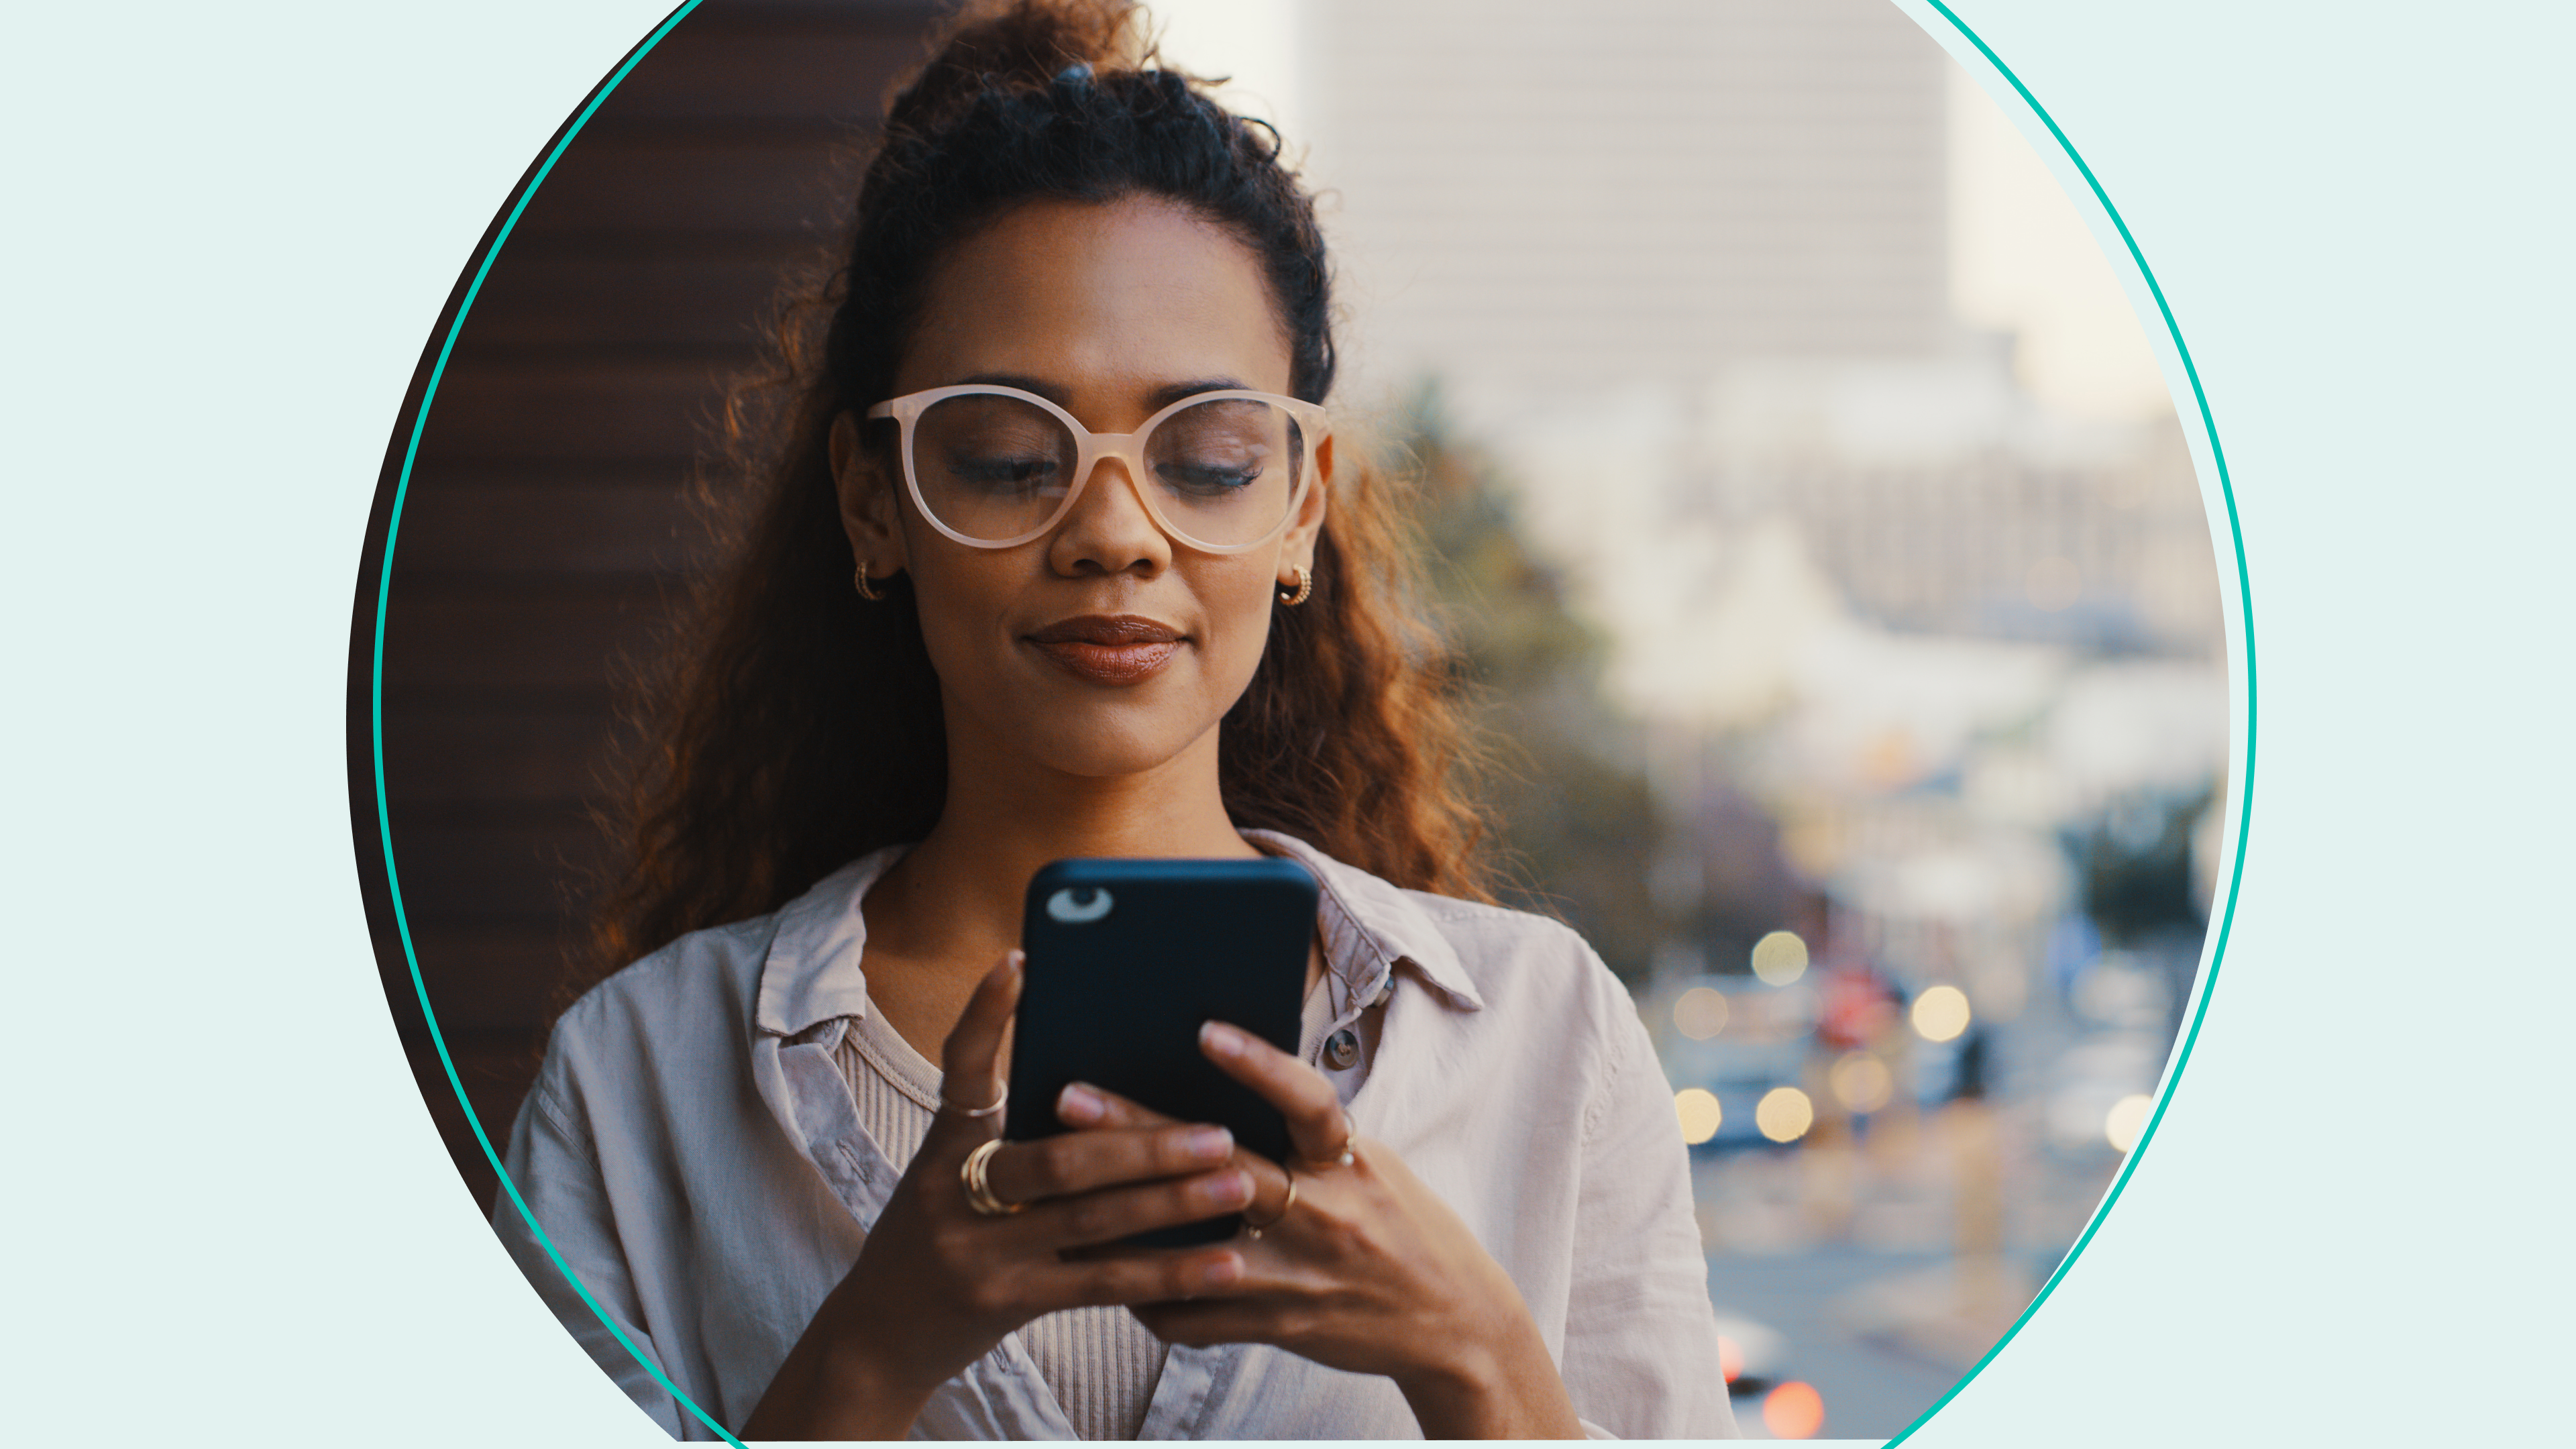 woman with big glasses looking at phone outside stock photo